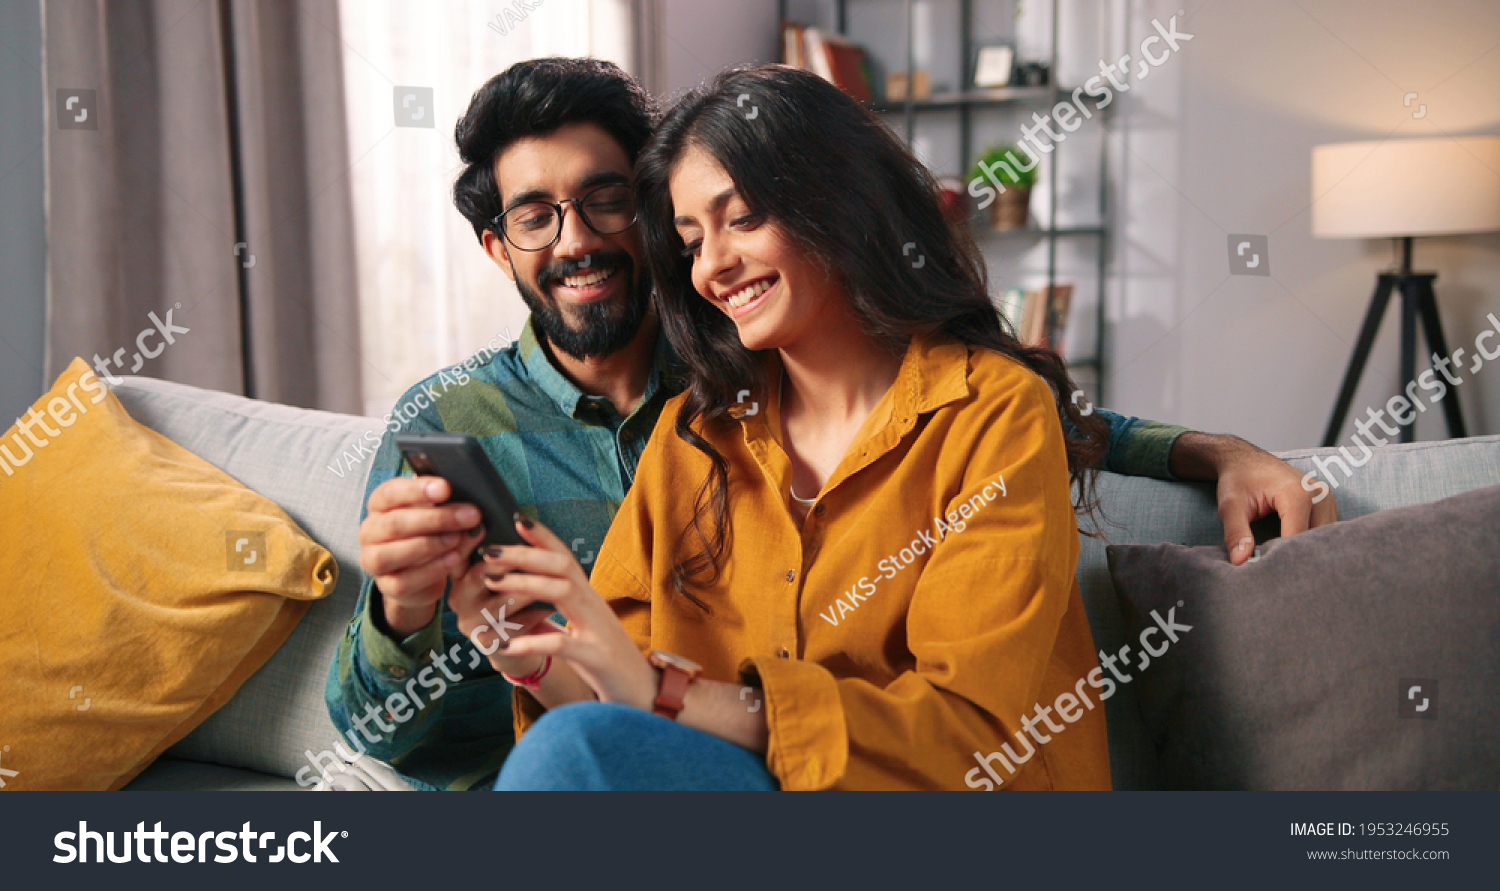 Portrait of cheerful positive young lovely couple smiling spending time together at home sitting on sofa typing on smartphone, searching internet using social network app on cellphone, family concept #1953246955